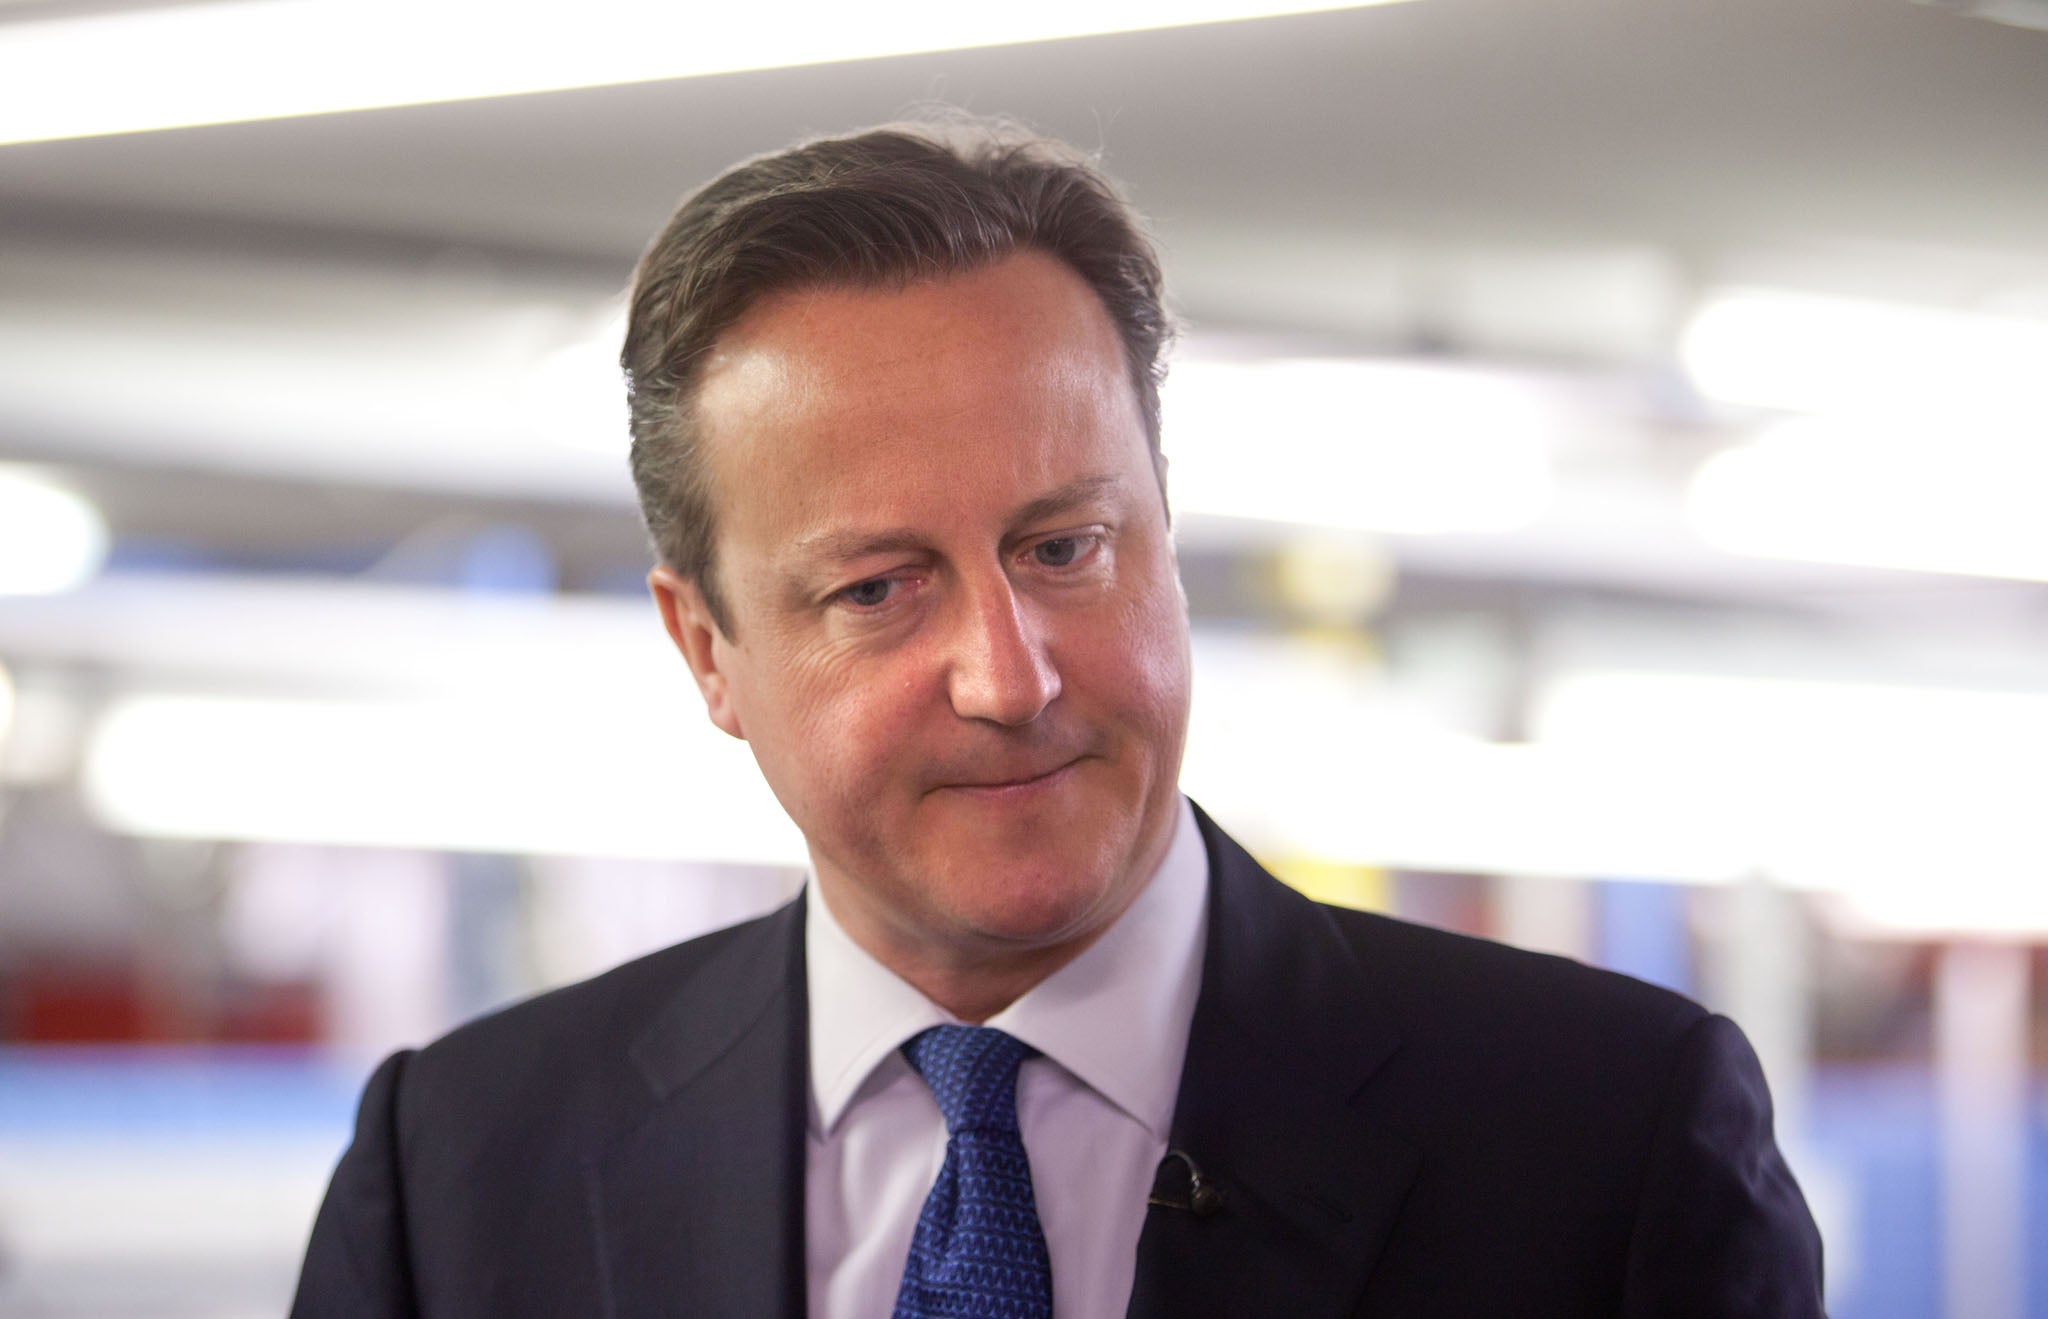 David Cameron said he 'was very sorry to receive' Maria Miller's resignation